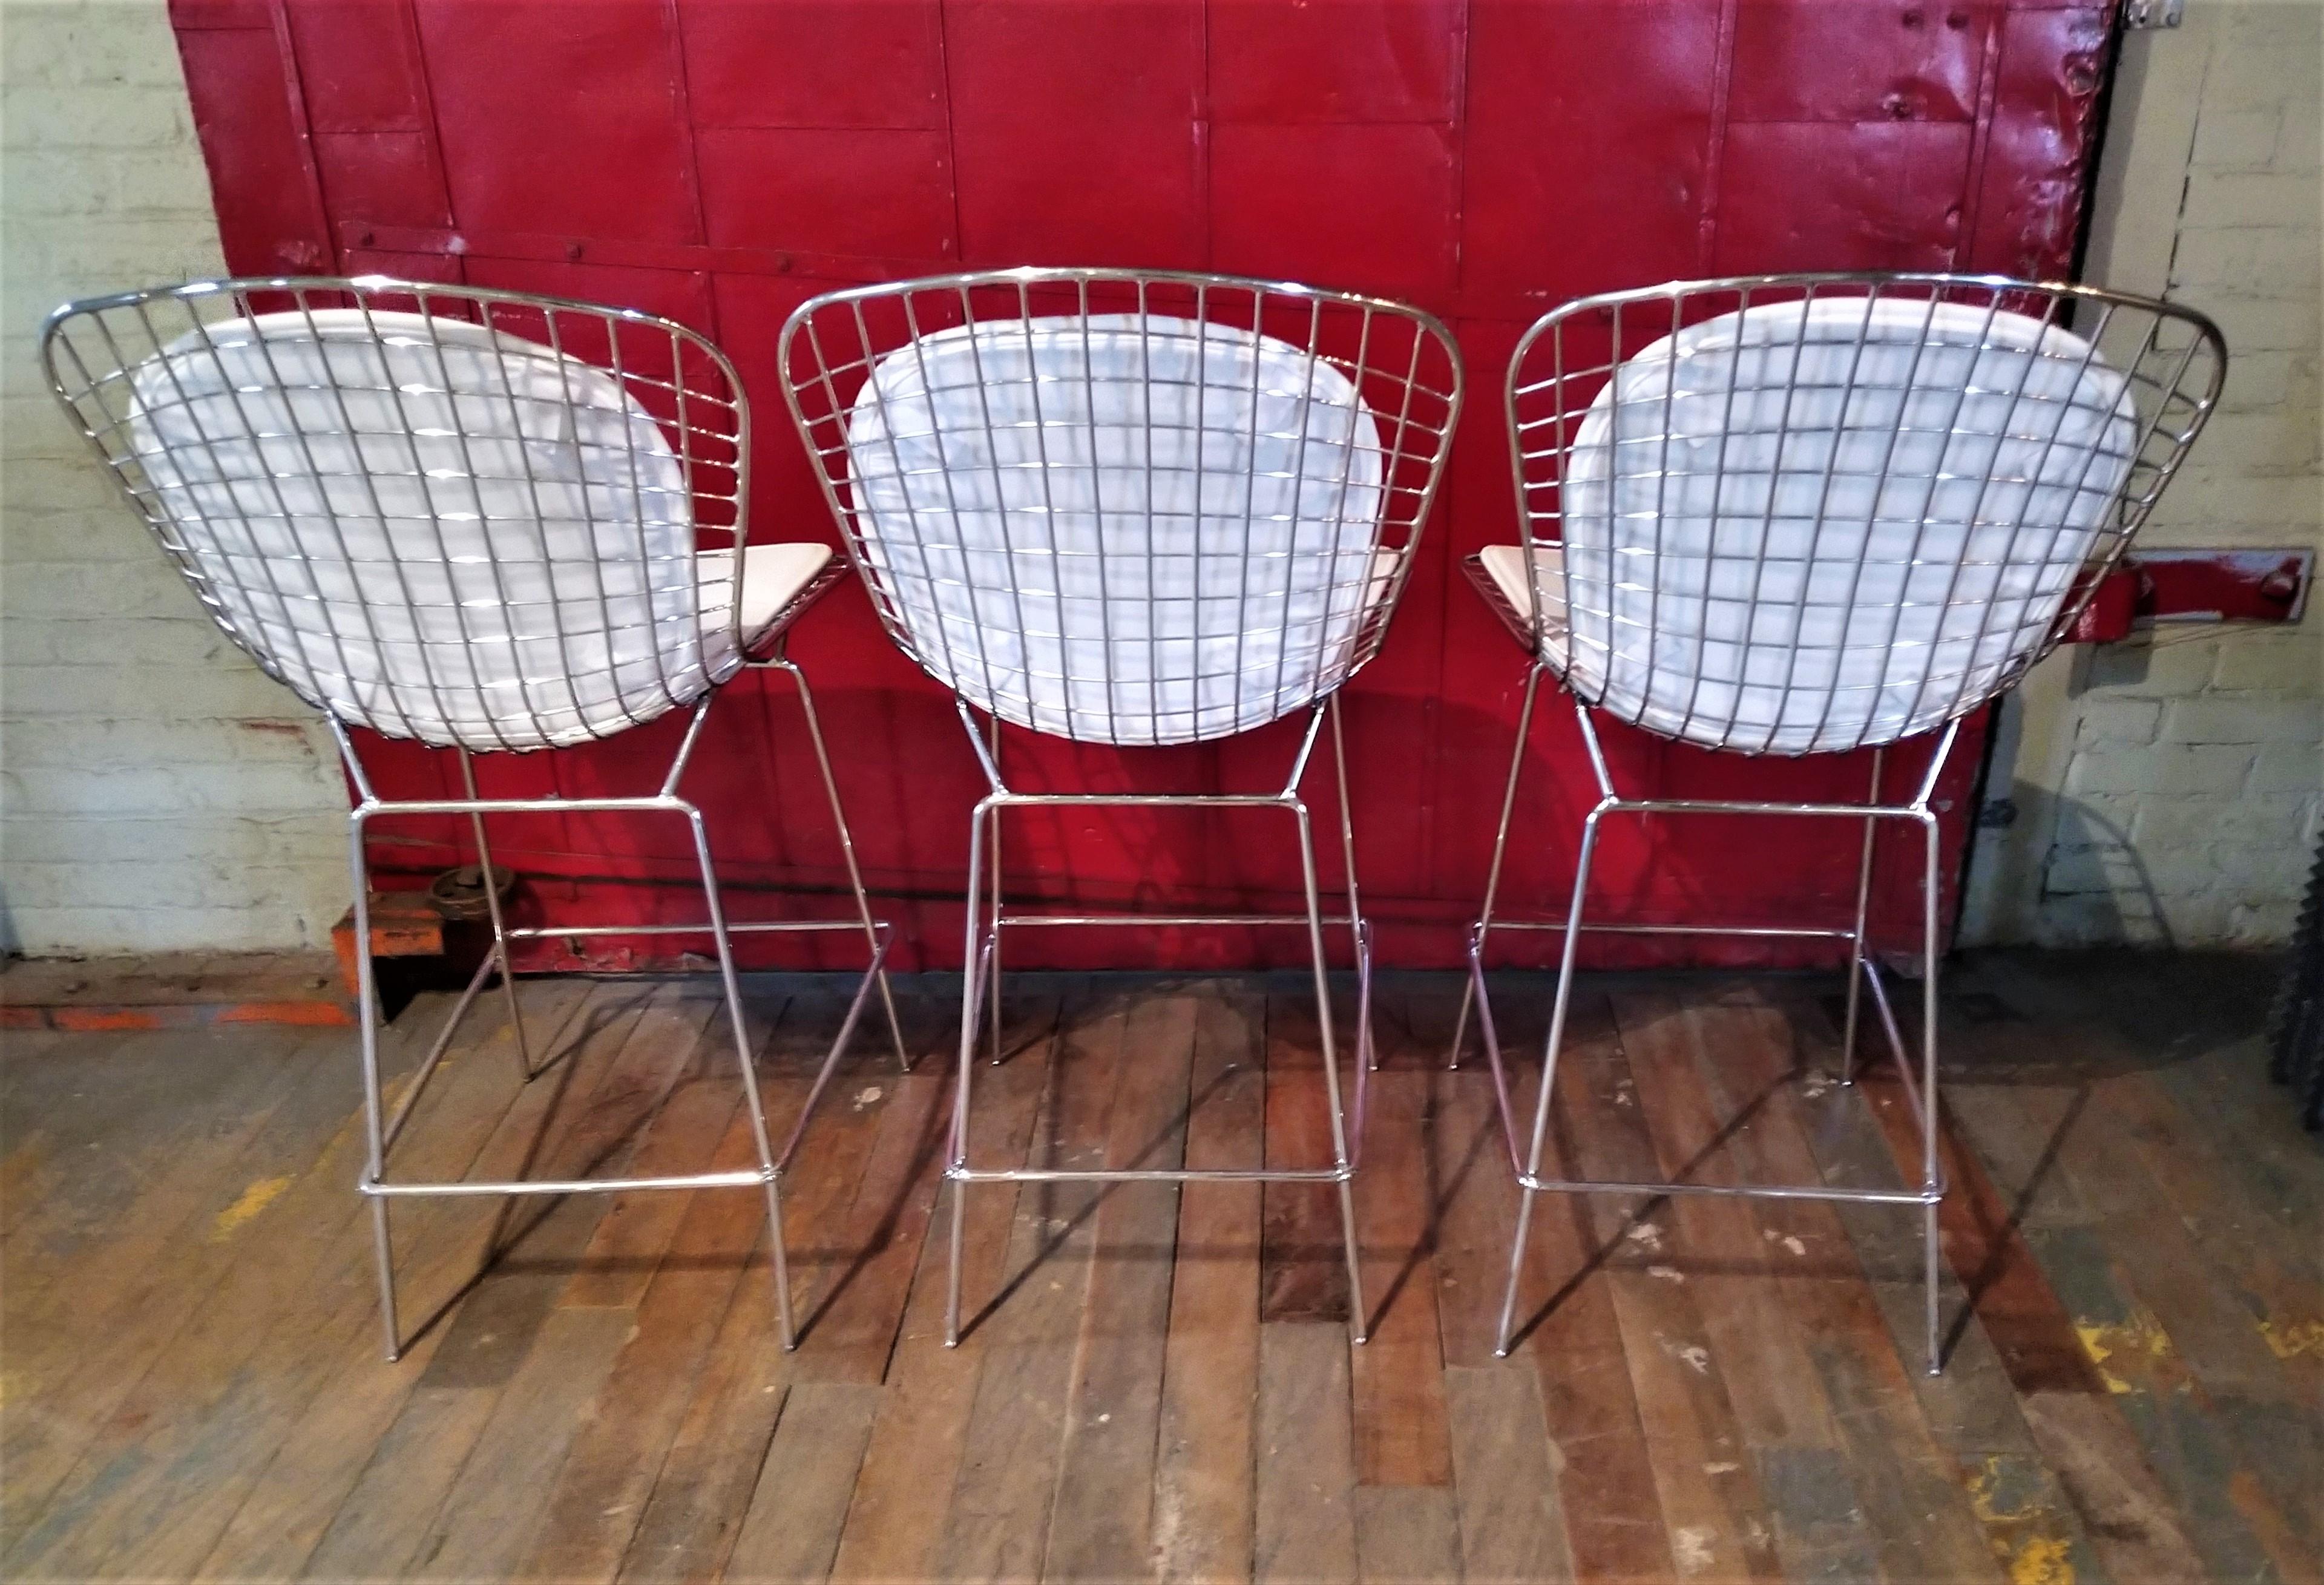 Bertoia style wire stools

Overall dimensions: 20 1/2